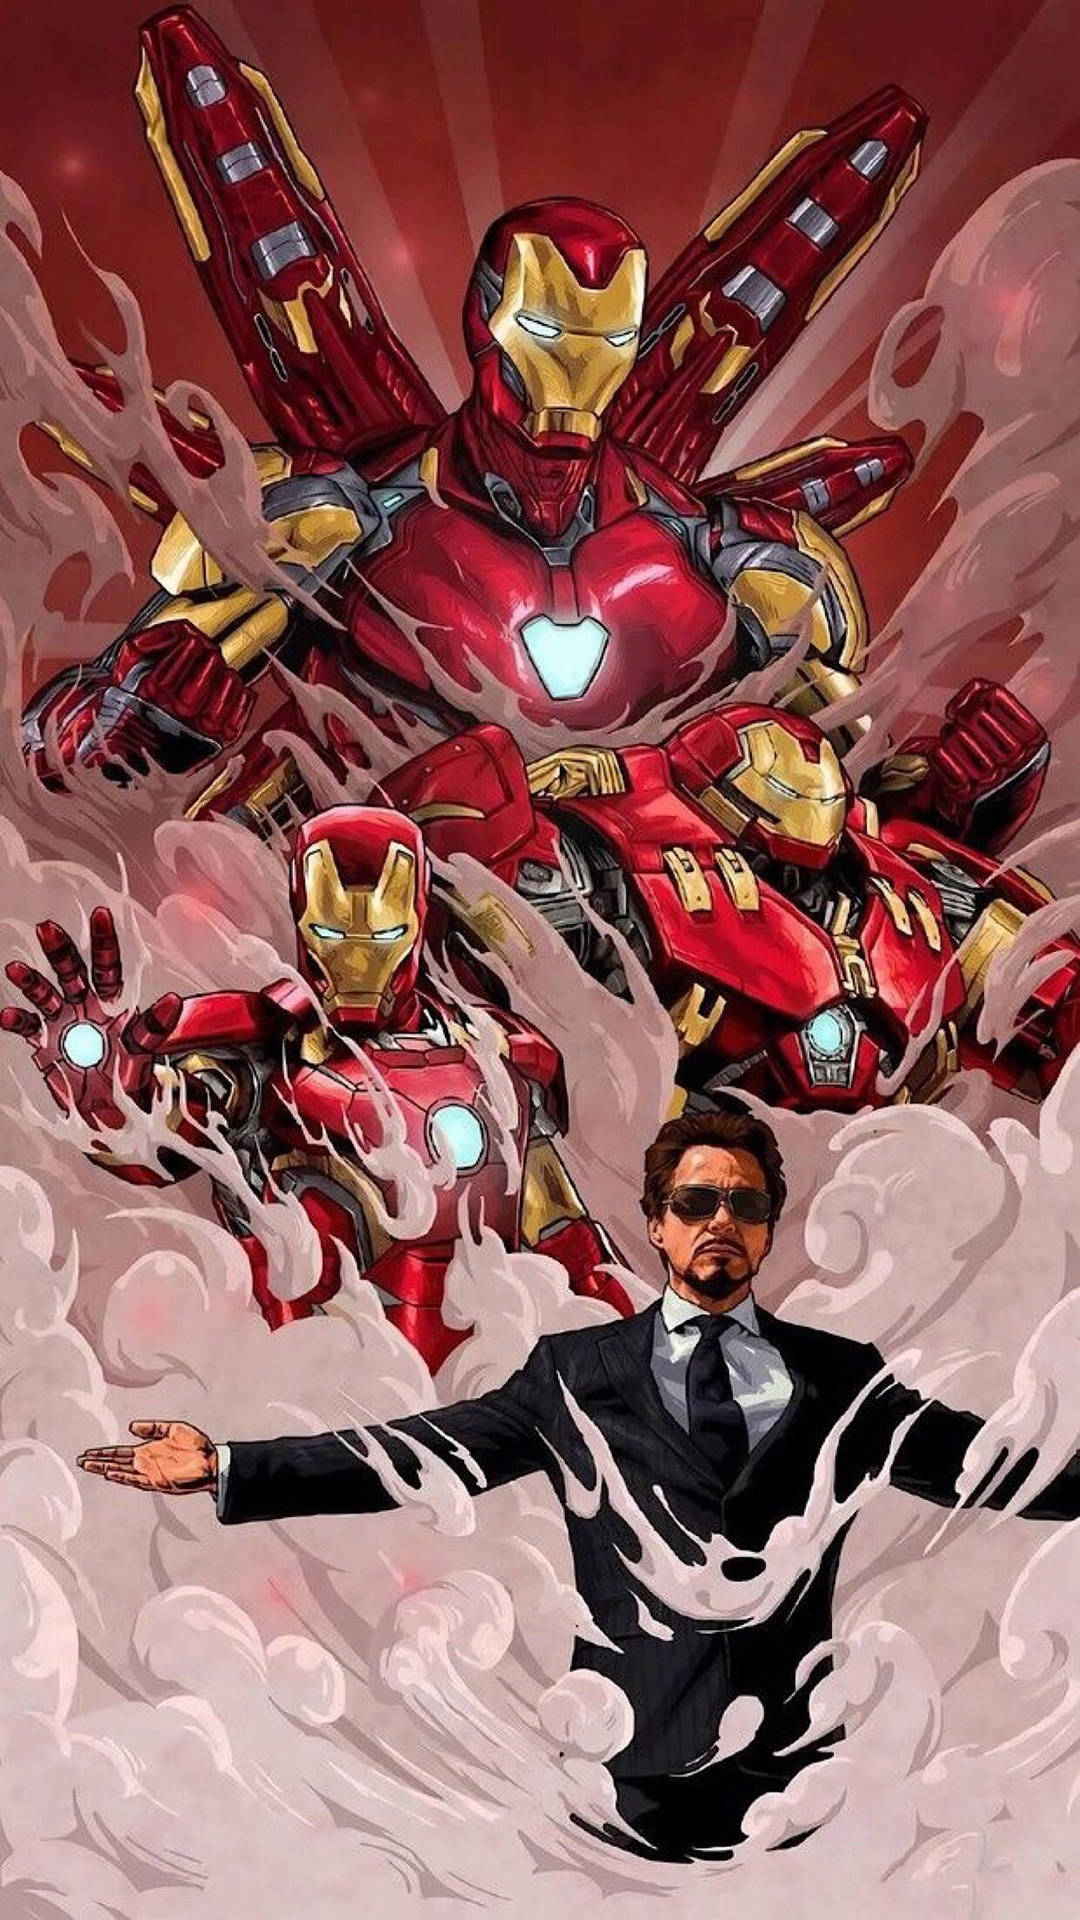 A Comic Book Cover With Iron Man And His Friends Wallpaper